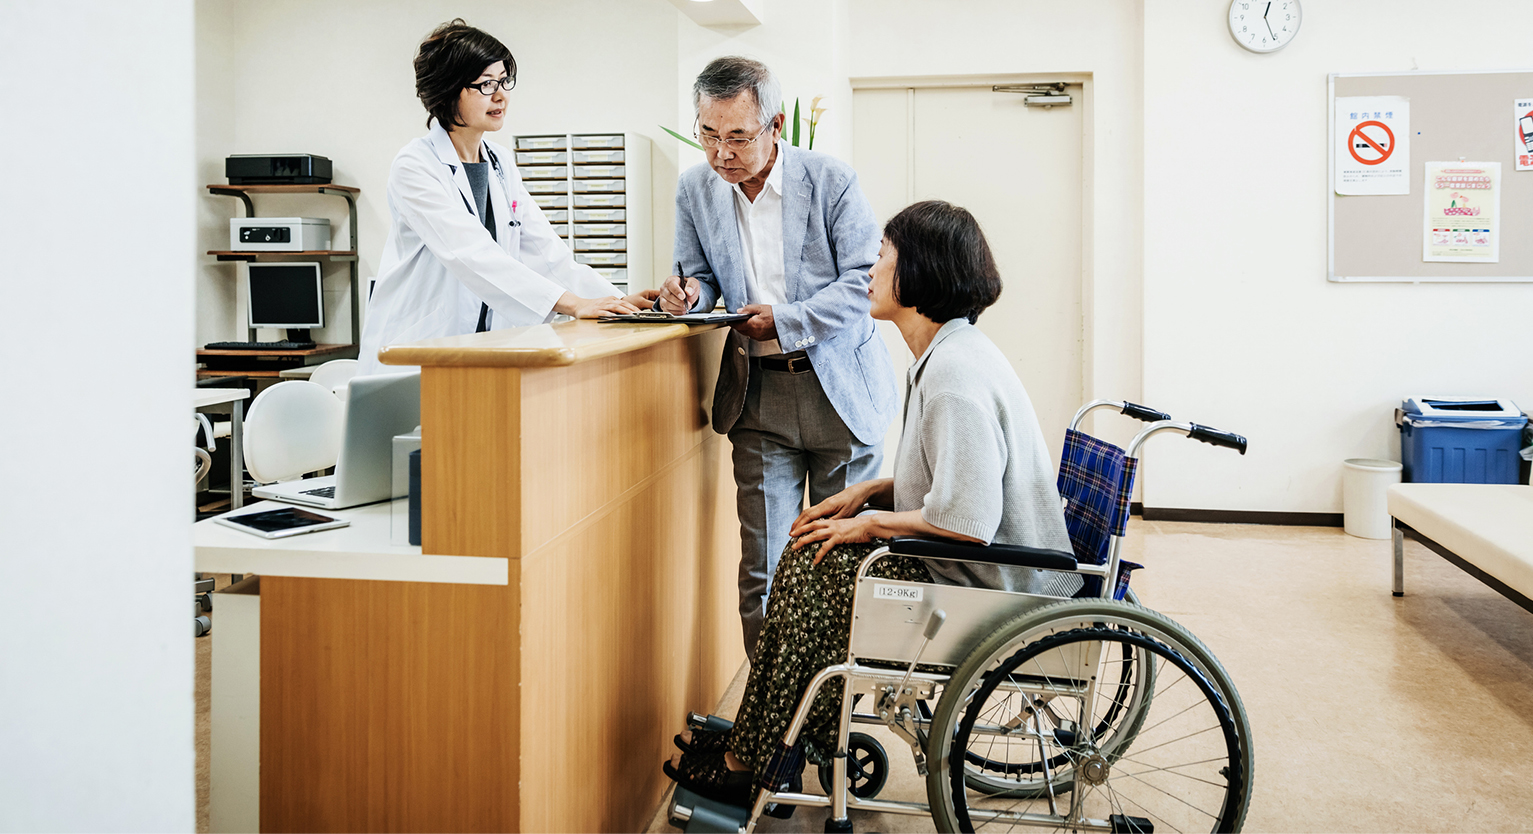 A doctor assists two patients, one of which is in a wheelchair.